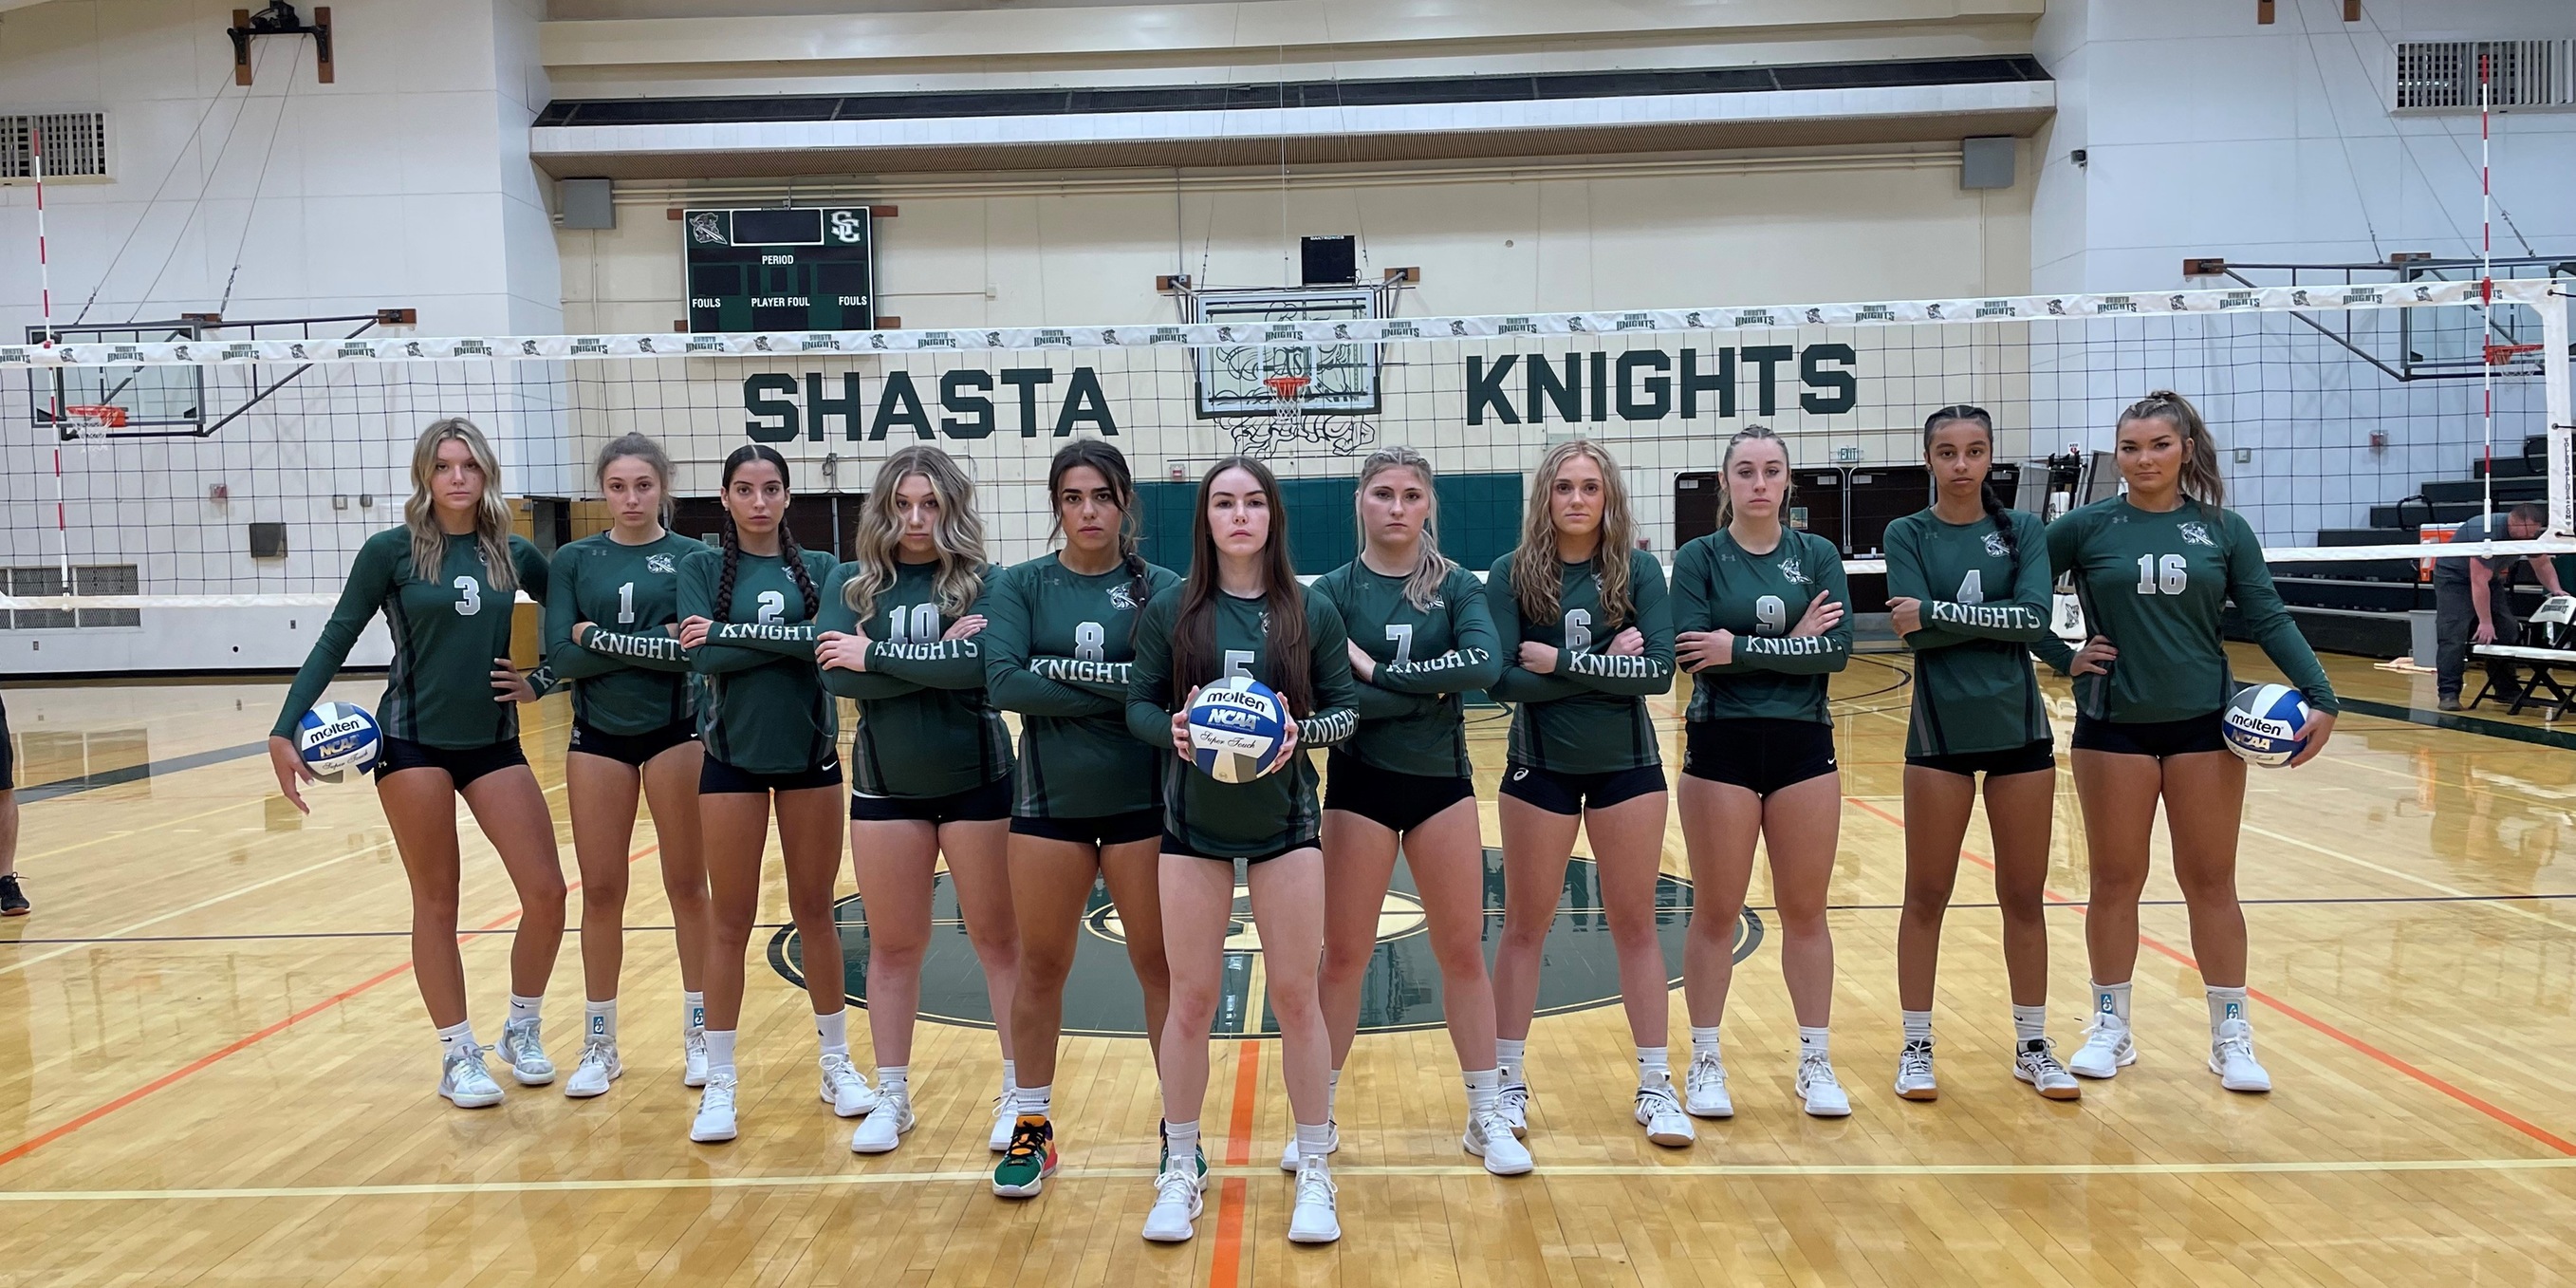 KNIGHTS SWEPT BY LASSEN IN CONFERENCE OPENER